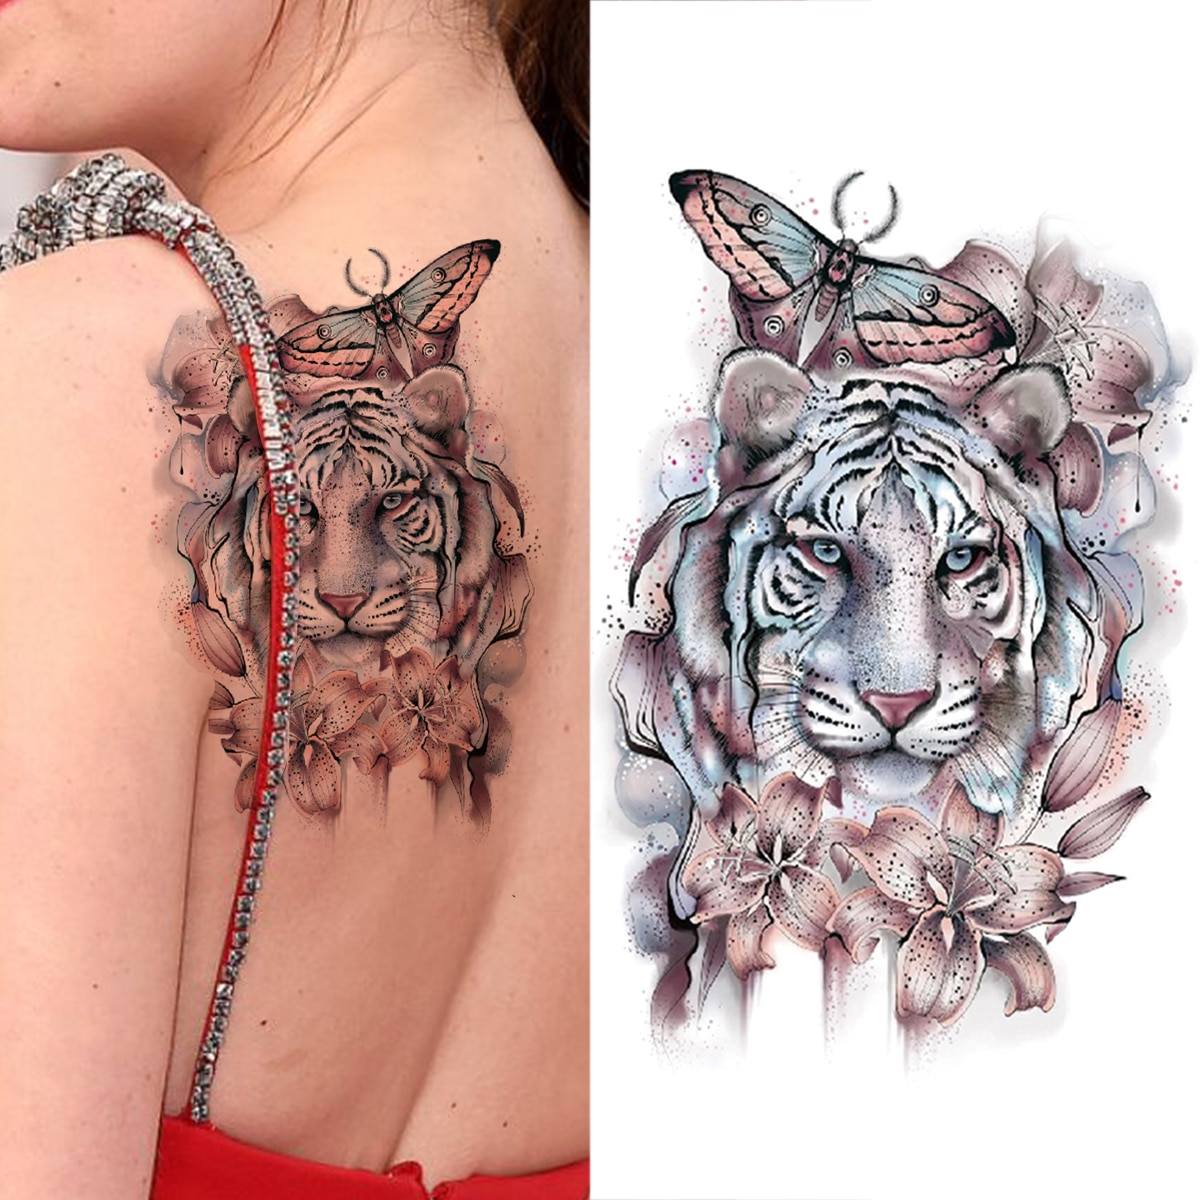 Meaning of tiger lily tattoo